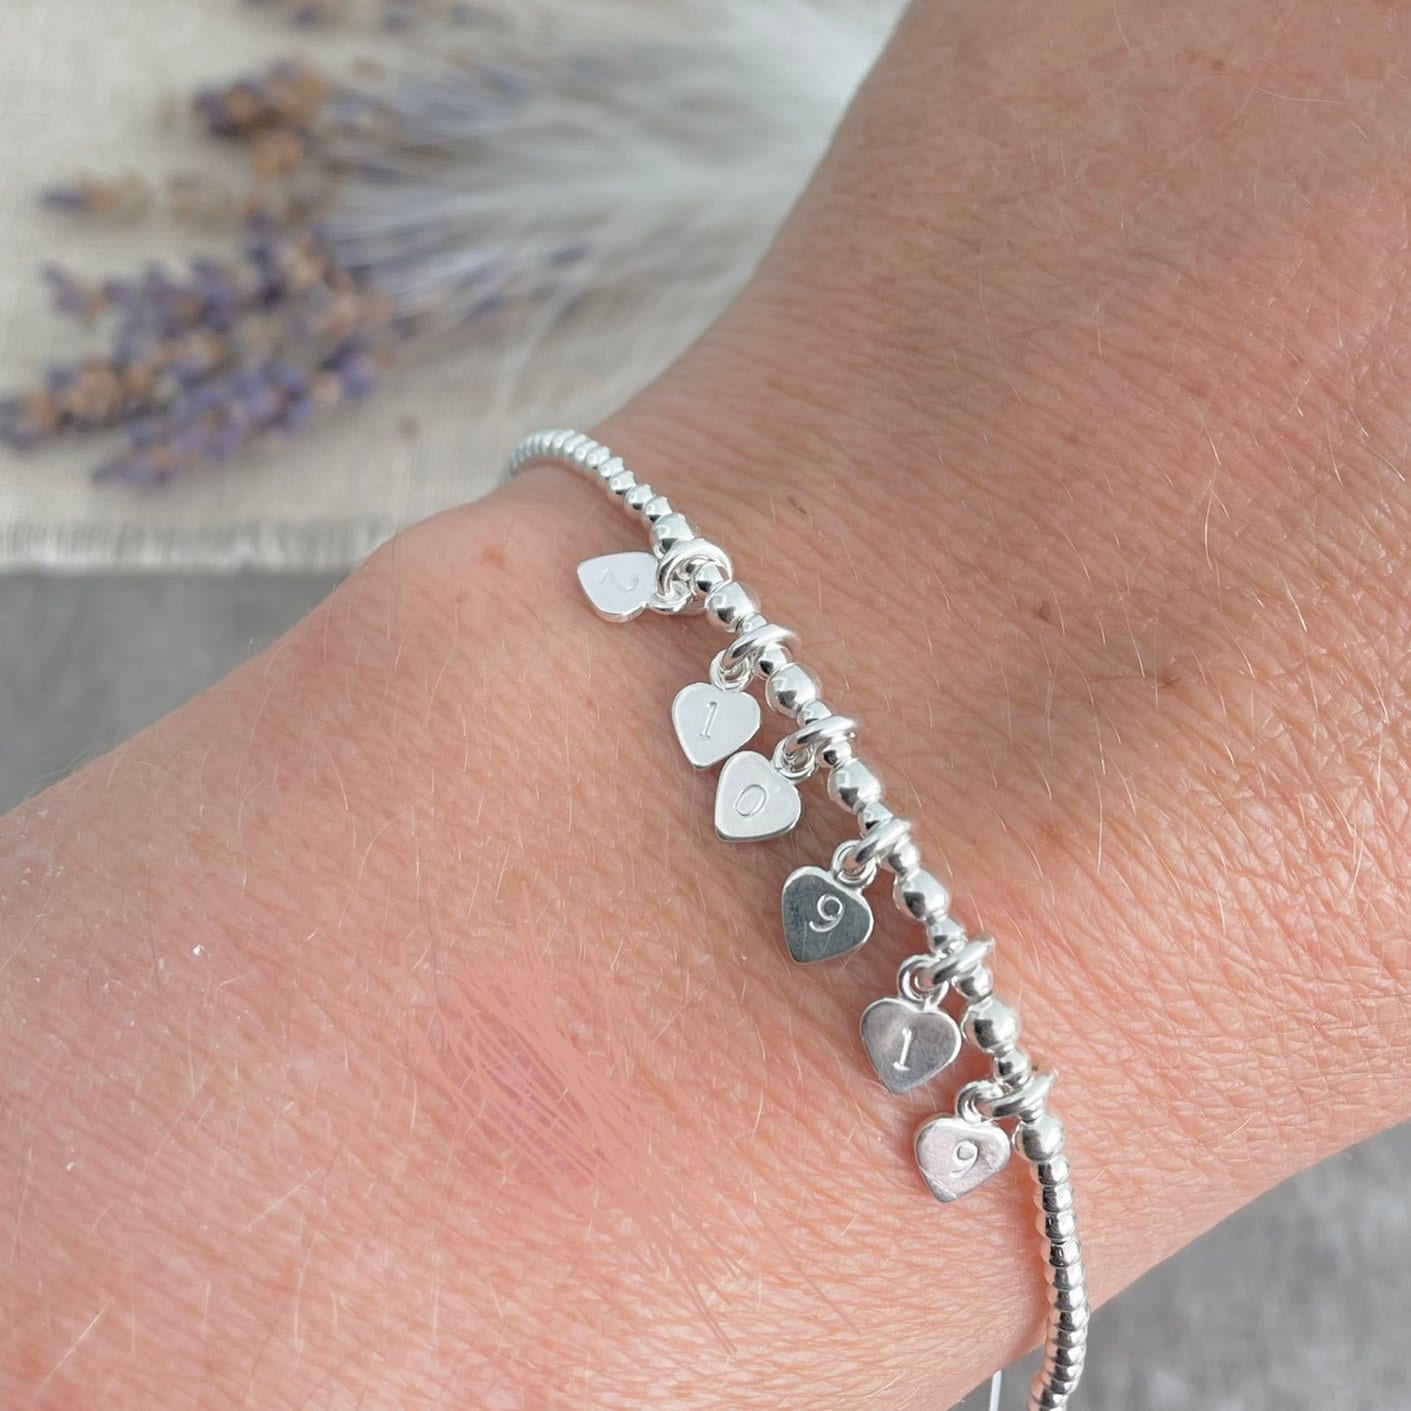 Wedding Date Bracelet, Gift for bride, Anniversary Gift, Wedding Day Jewellery in Sterling Silver